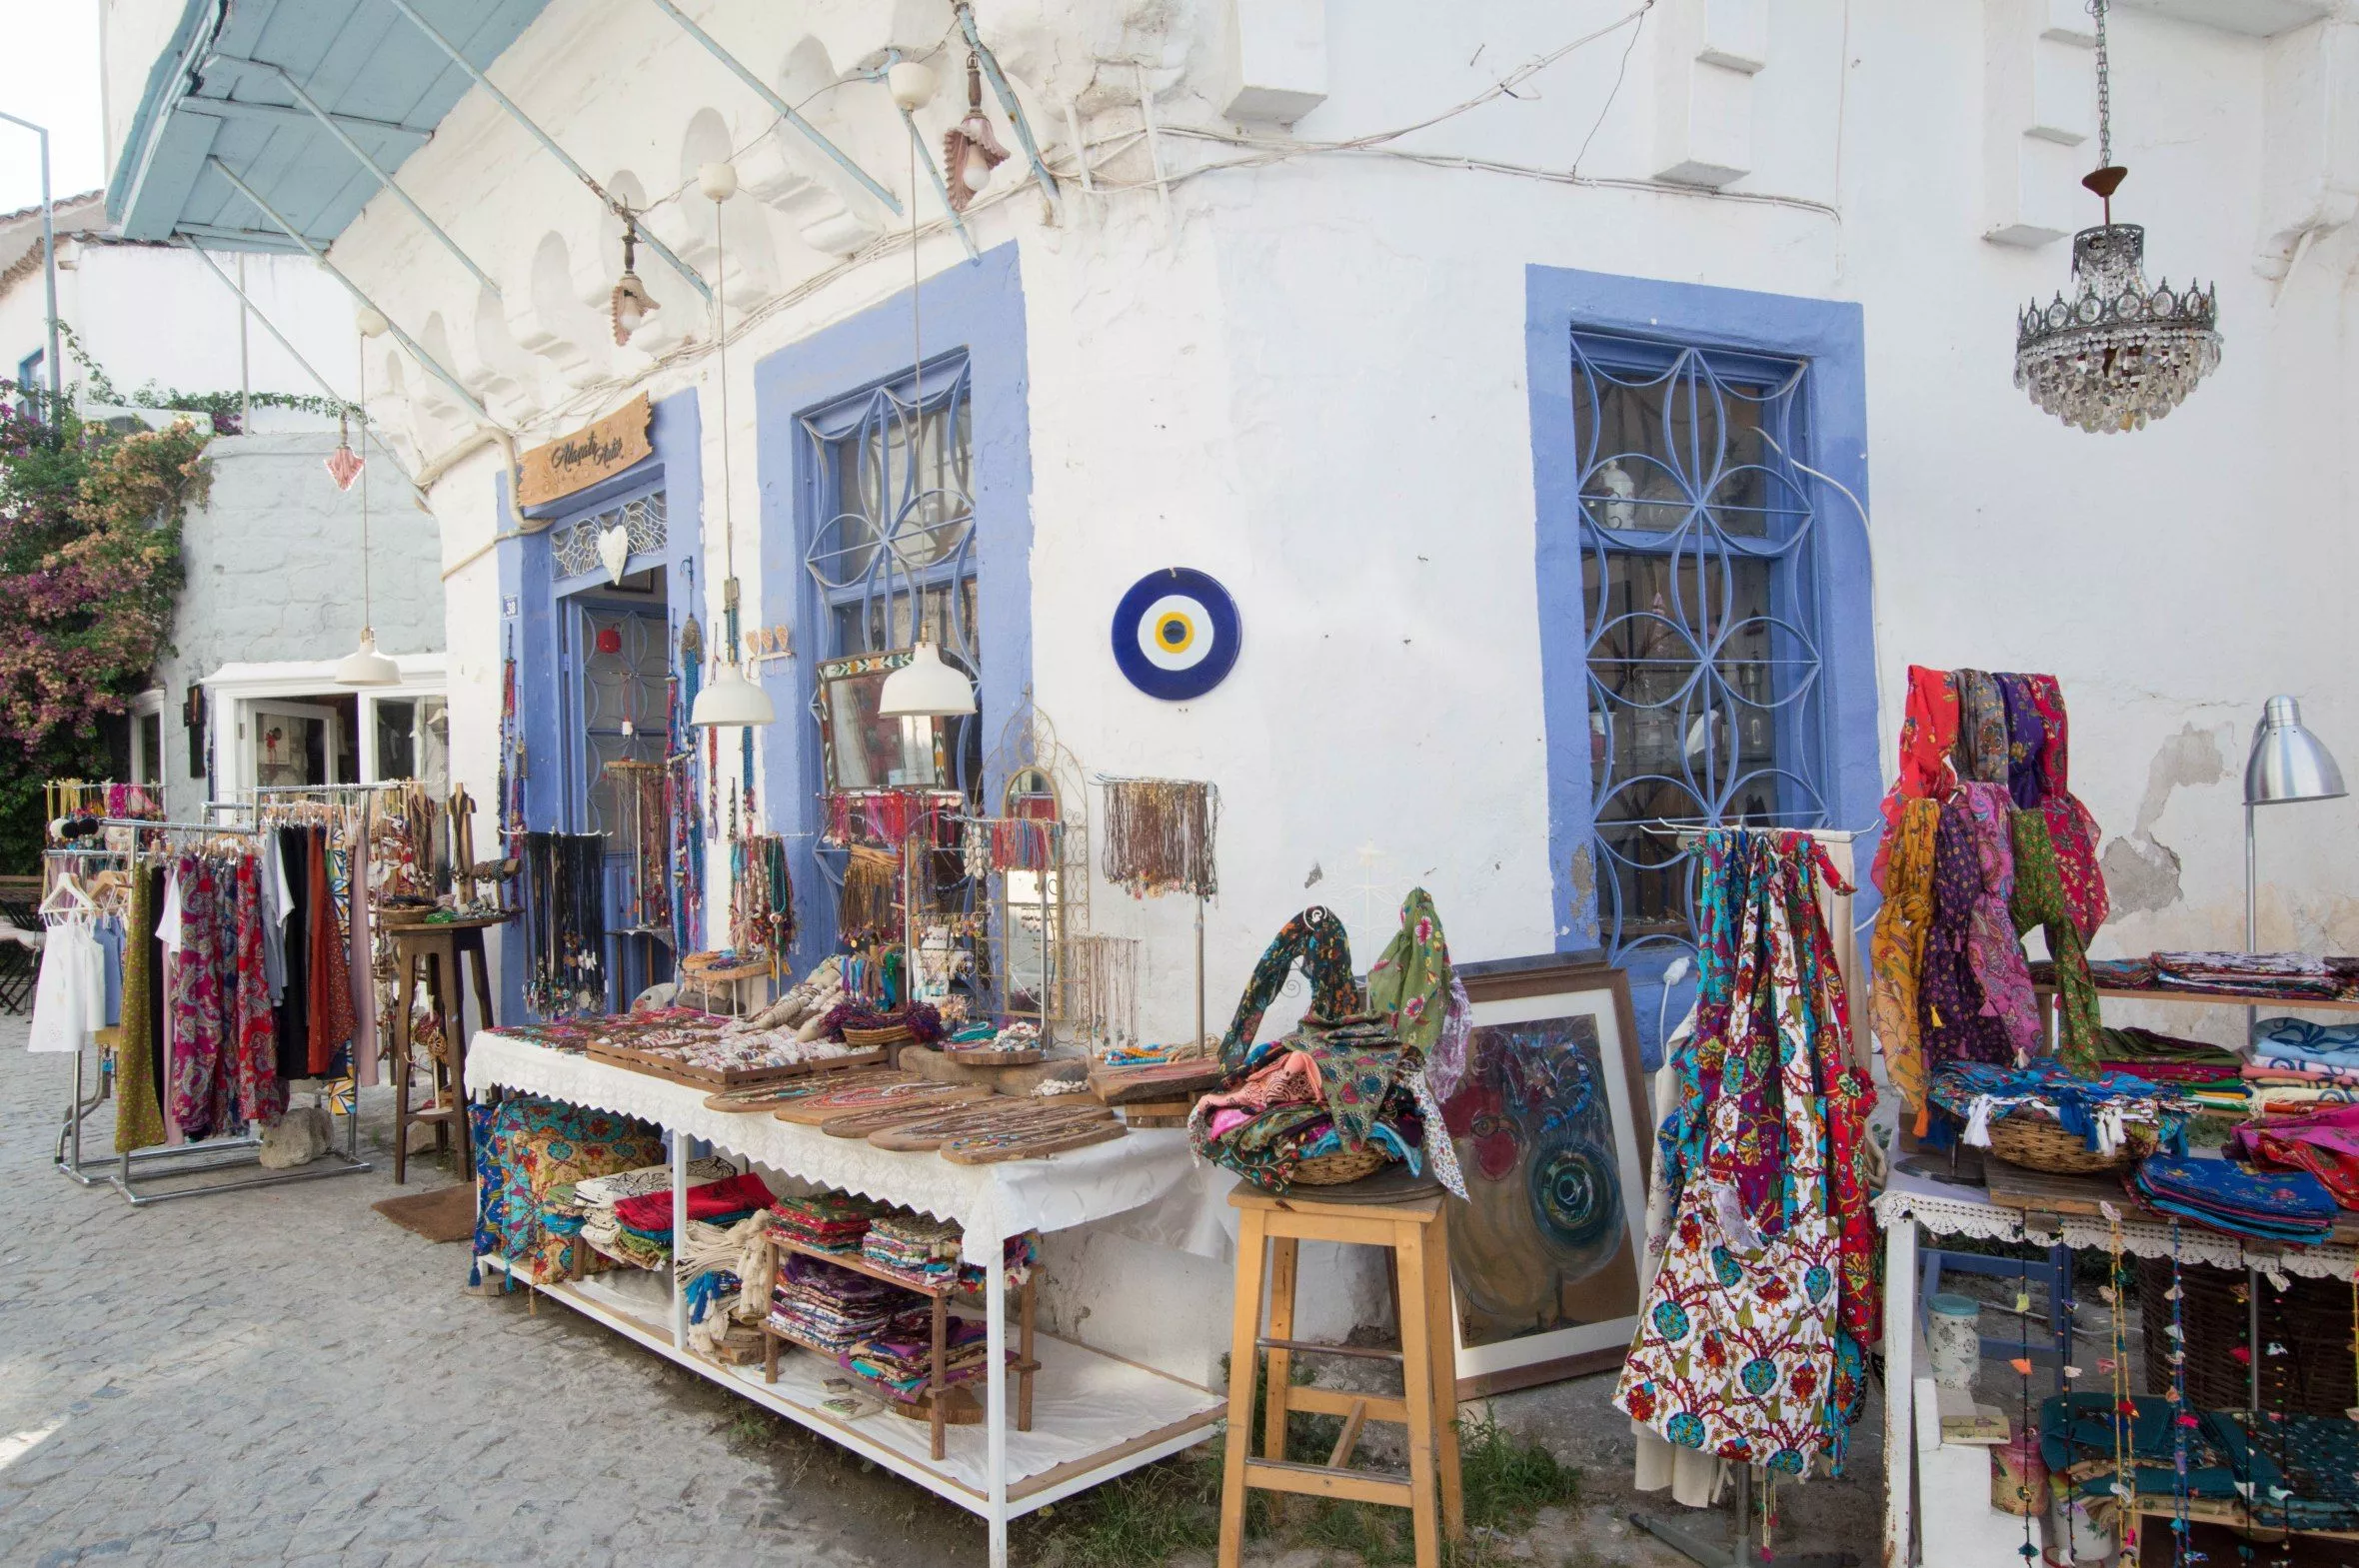 Alacati Bazaar in Turkey, Central Asia | Architecture - Rated 3.7